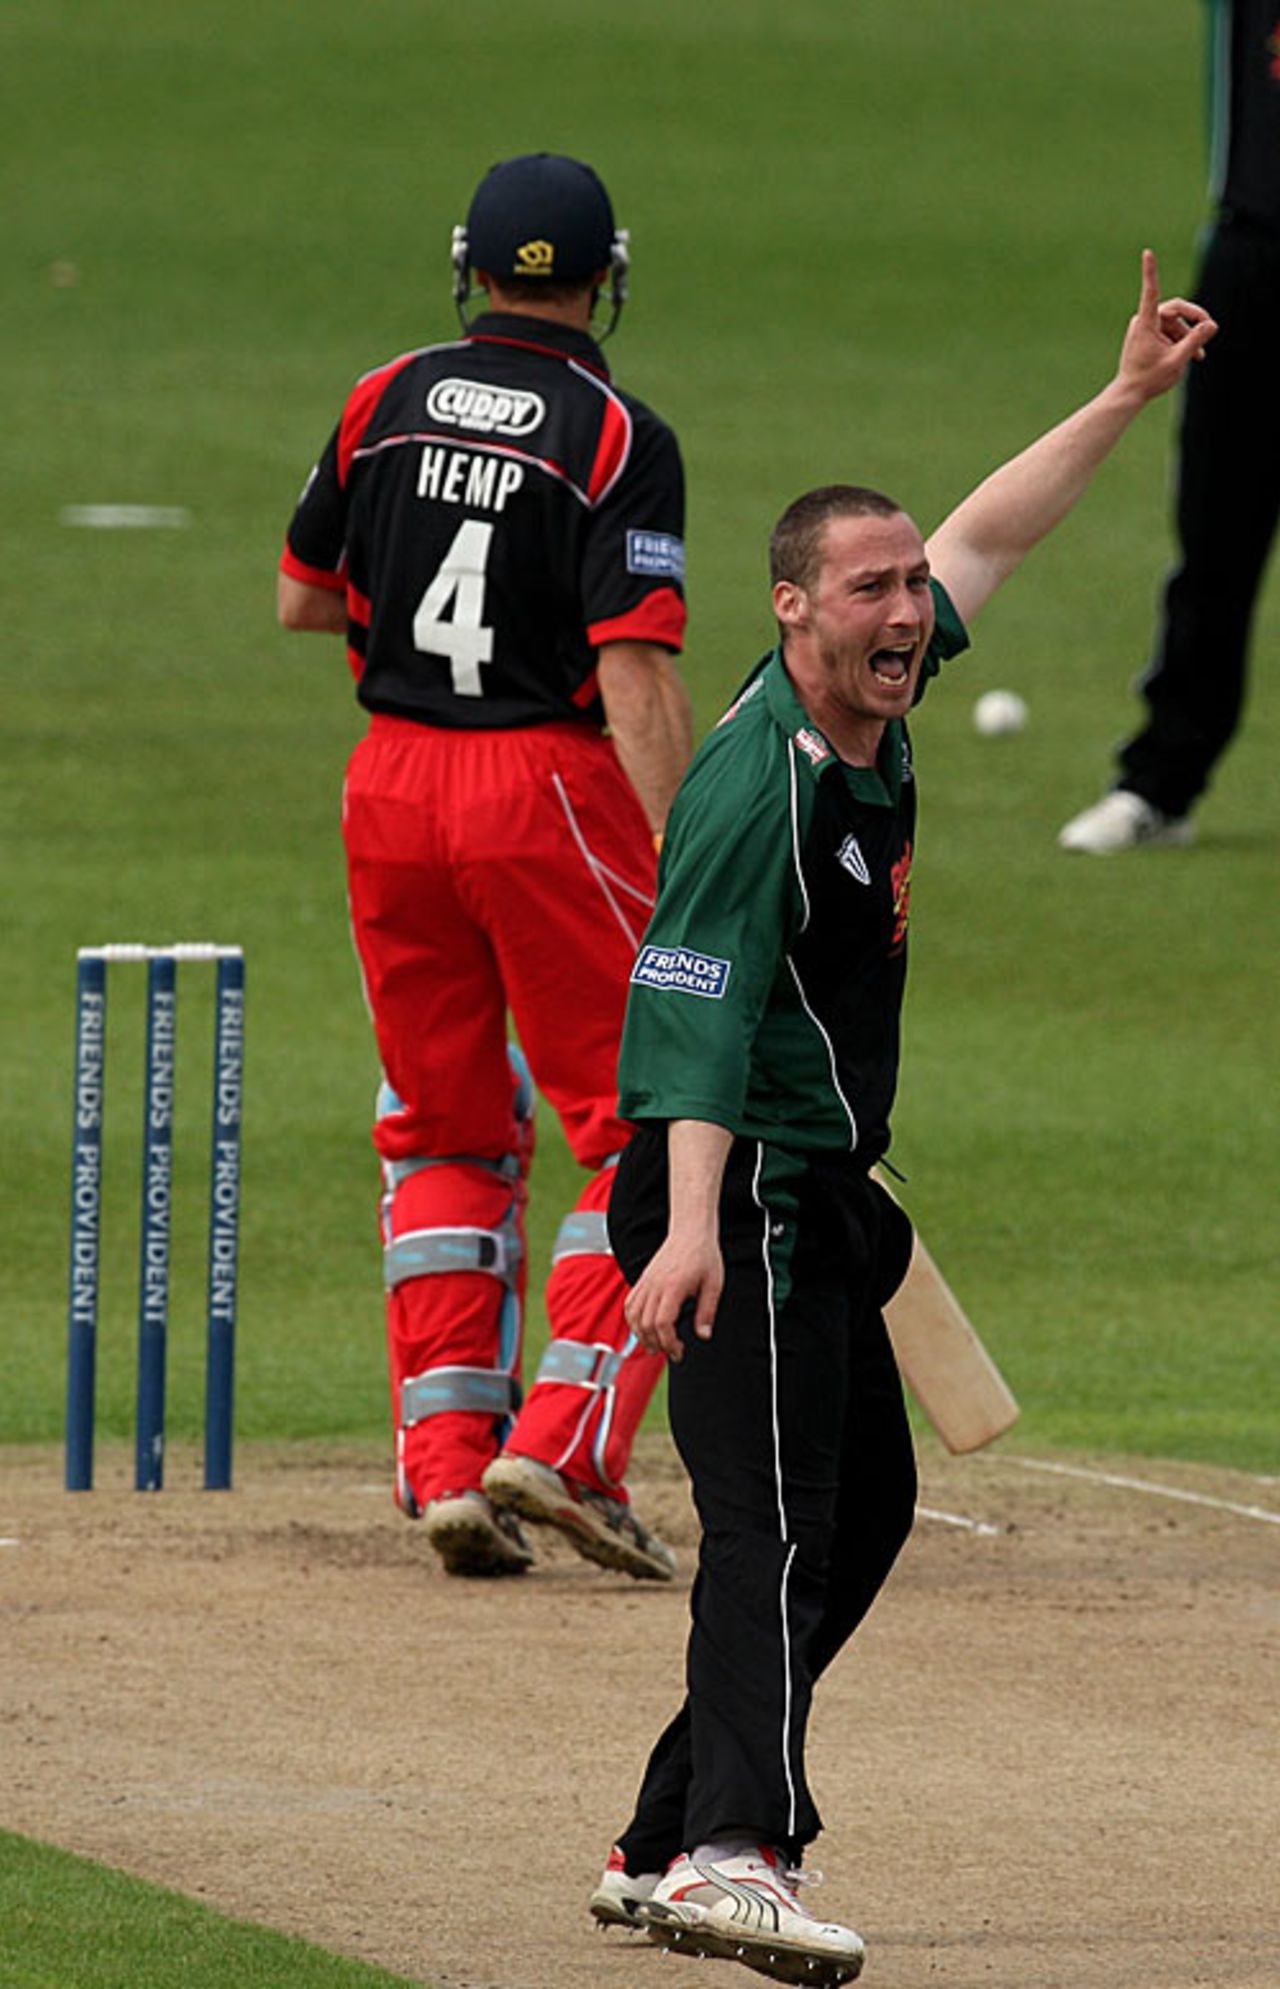 Simon Jones appeals unsuccessfully for the wicket of David Hemp, Worcestershire v Glamorgan, Friends Provident Trophy, New Road, May 5, 2008